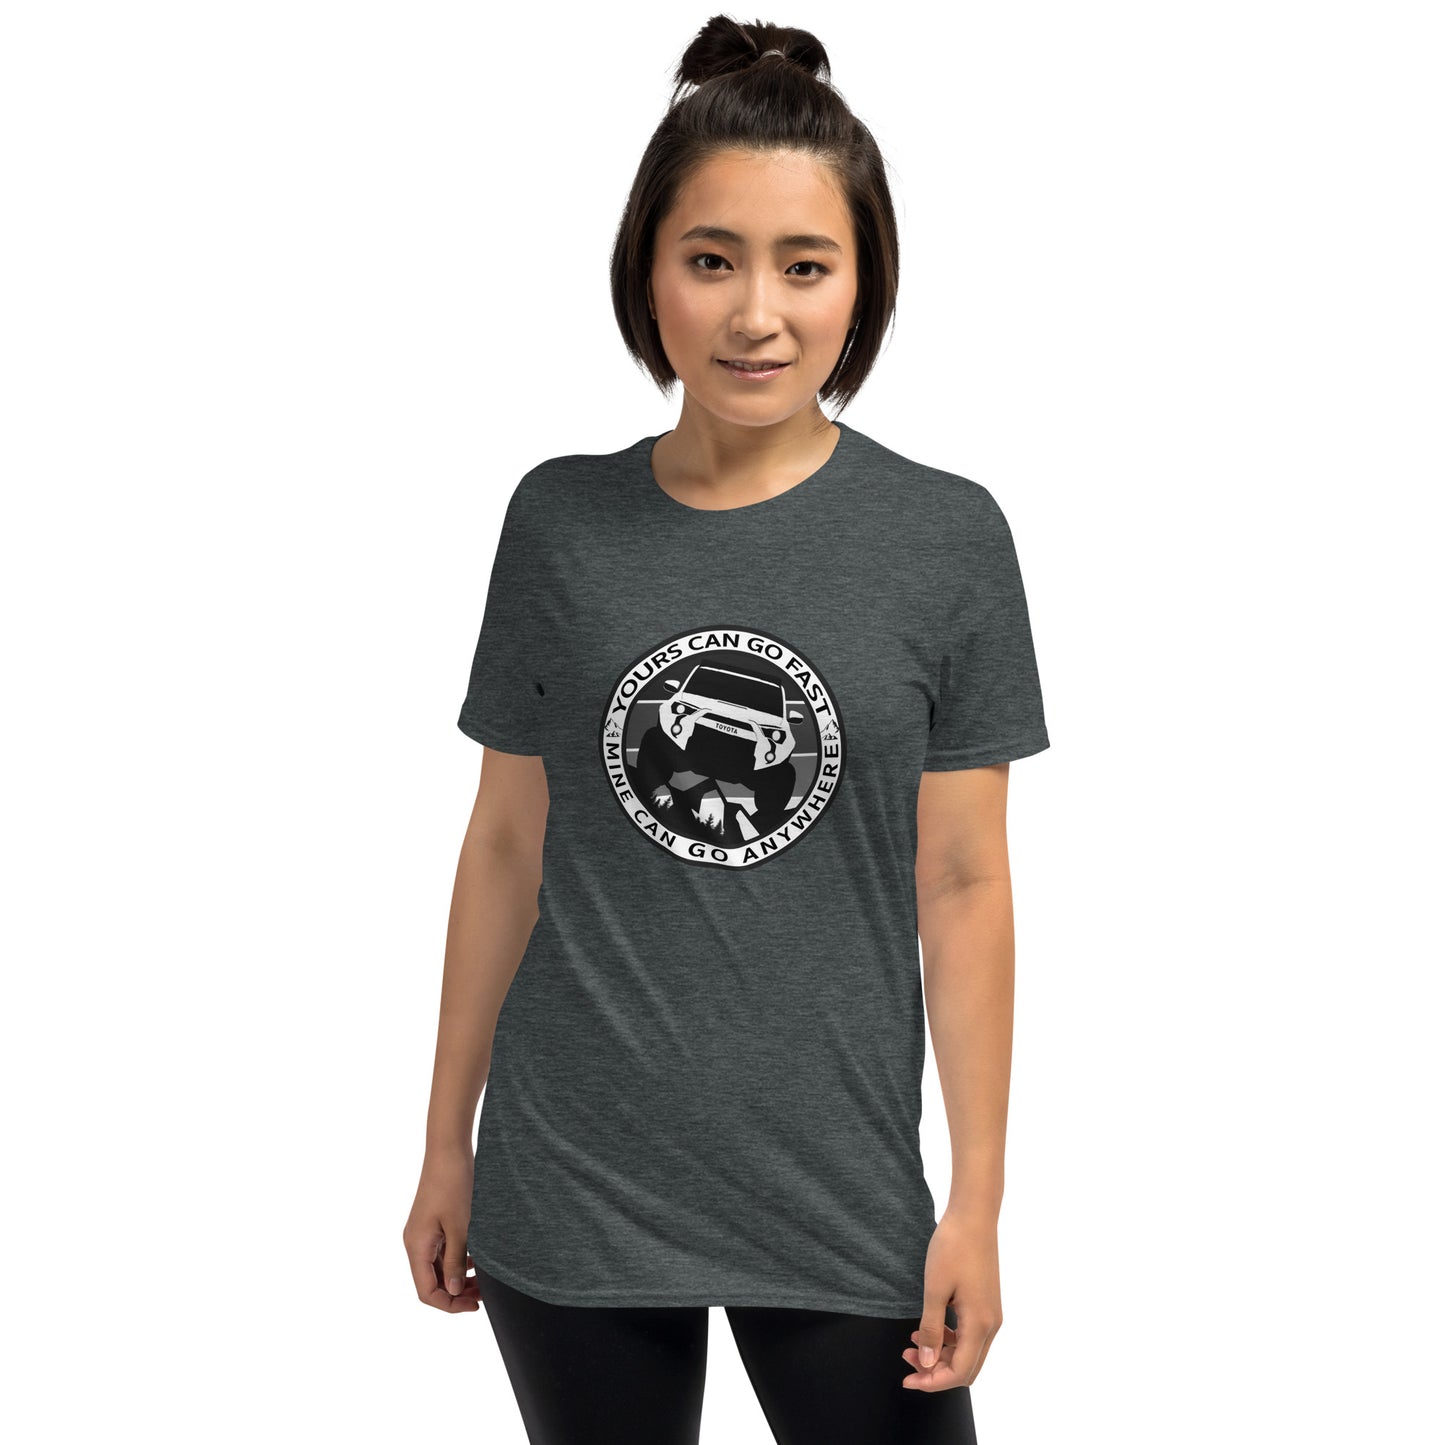 yours can go fast mine can go anywhere short sleeve t shirt, 4Runner Gear